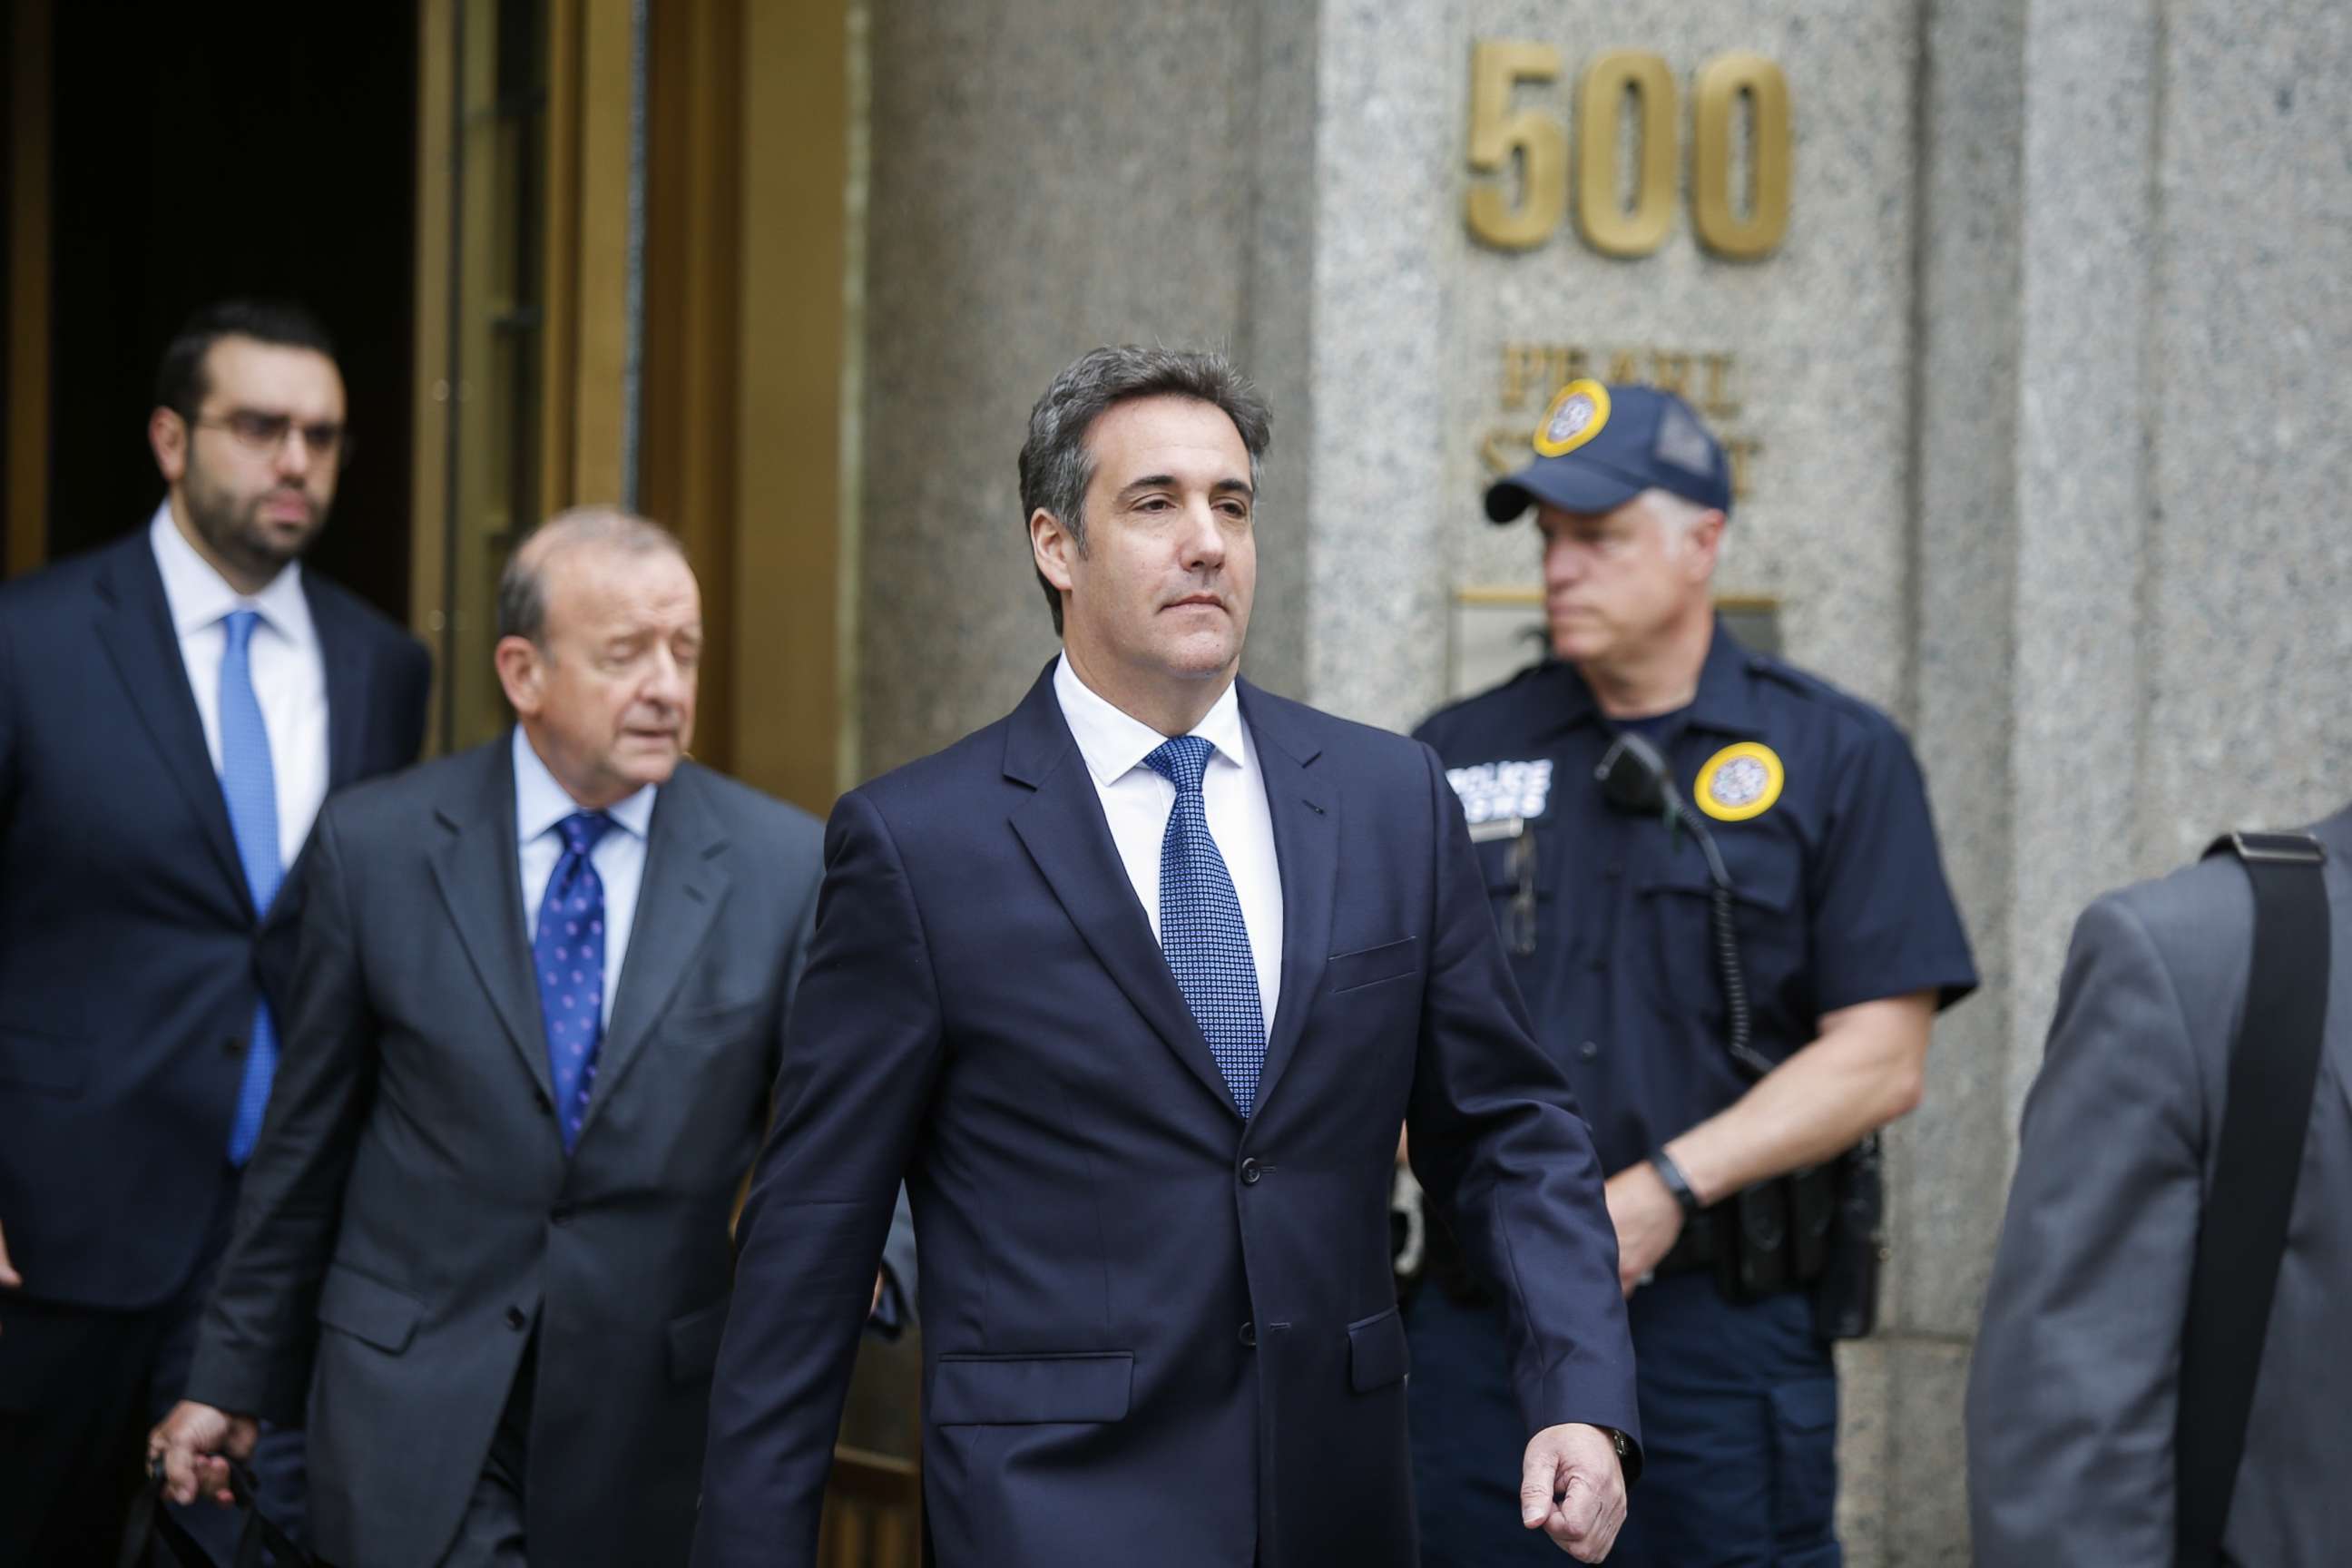 PHOTO: Michael Cohen, former personal lawyer for President Donald Trump, exits the United States District Court Southern District of New York on May 30, 2018 in New York City.